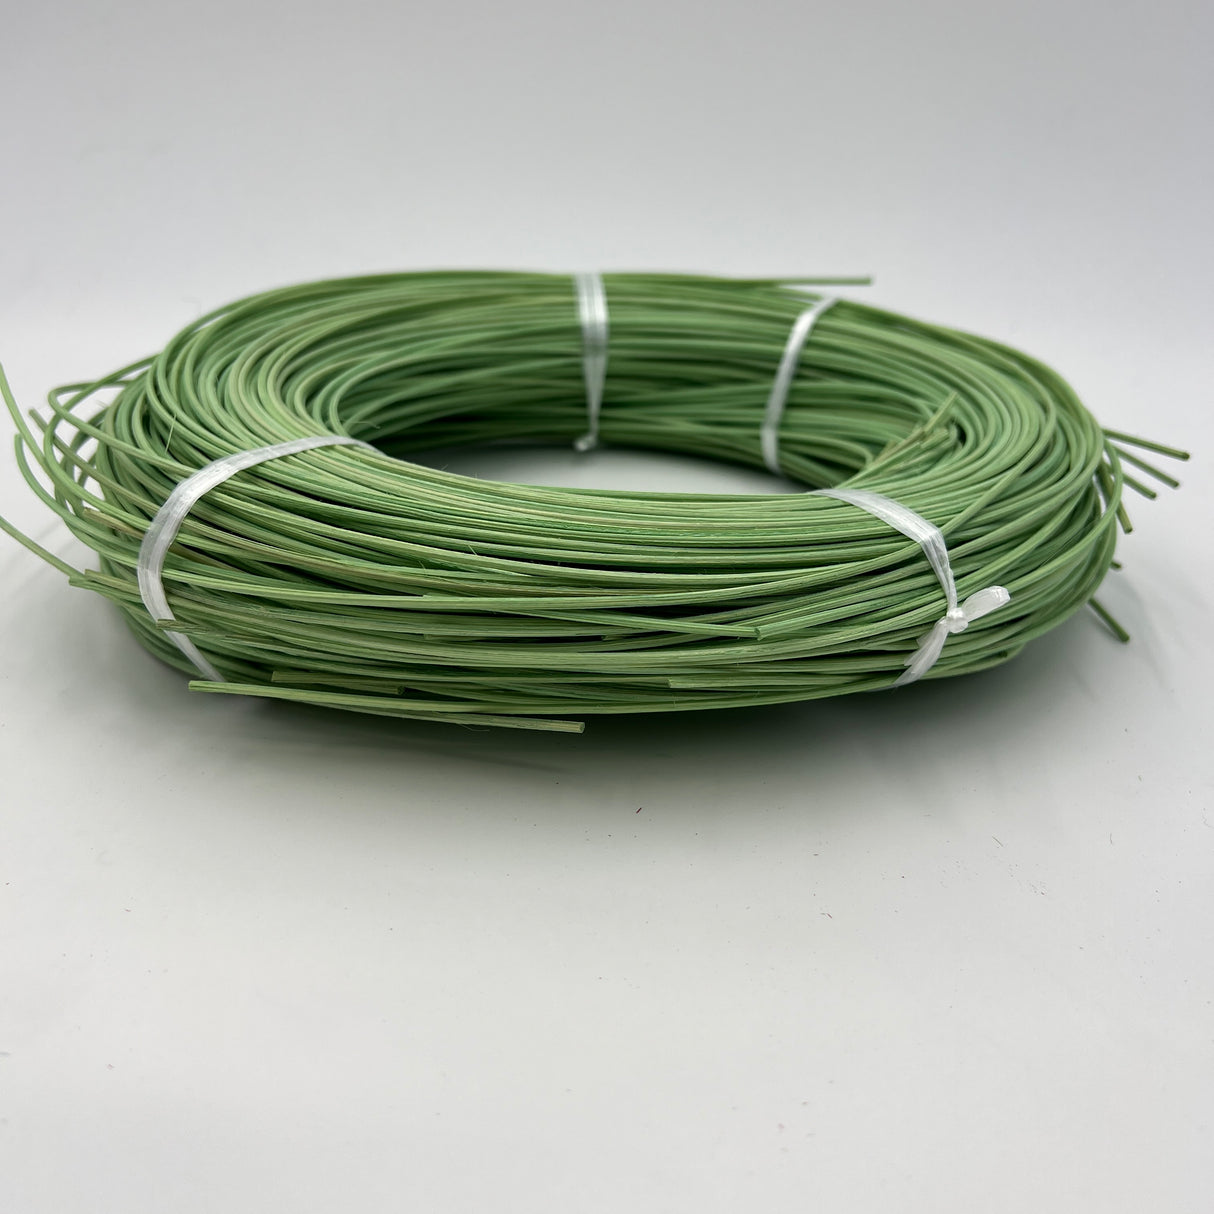 Celery - #2 Round - Dyed Reed (1/2 lb coil)